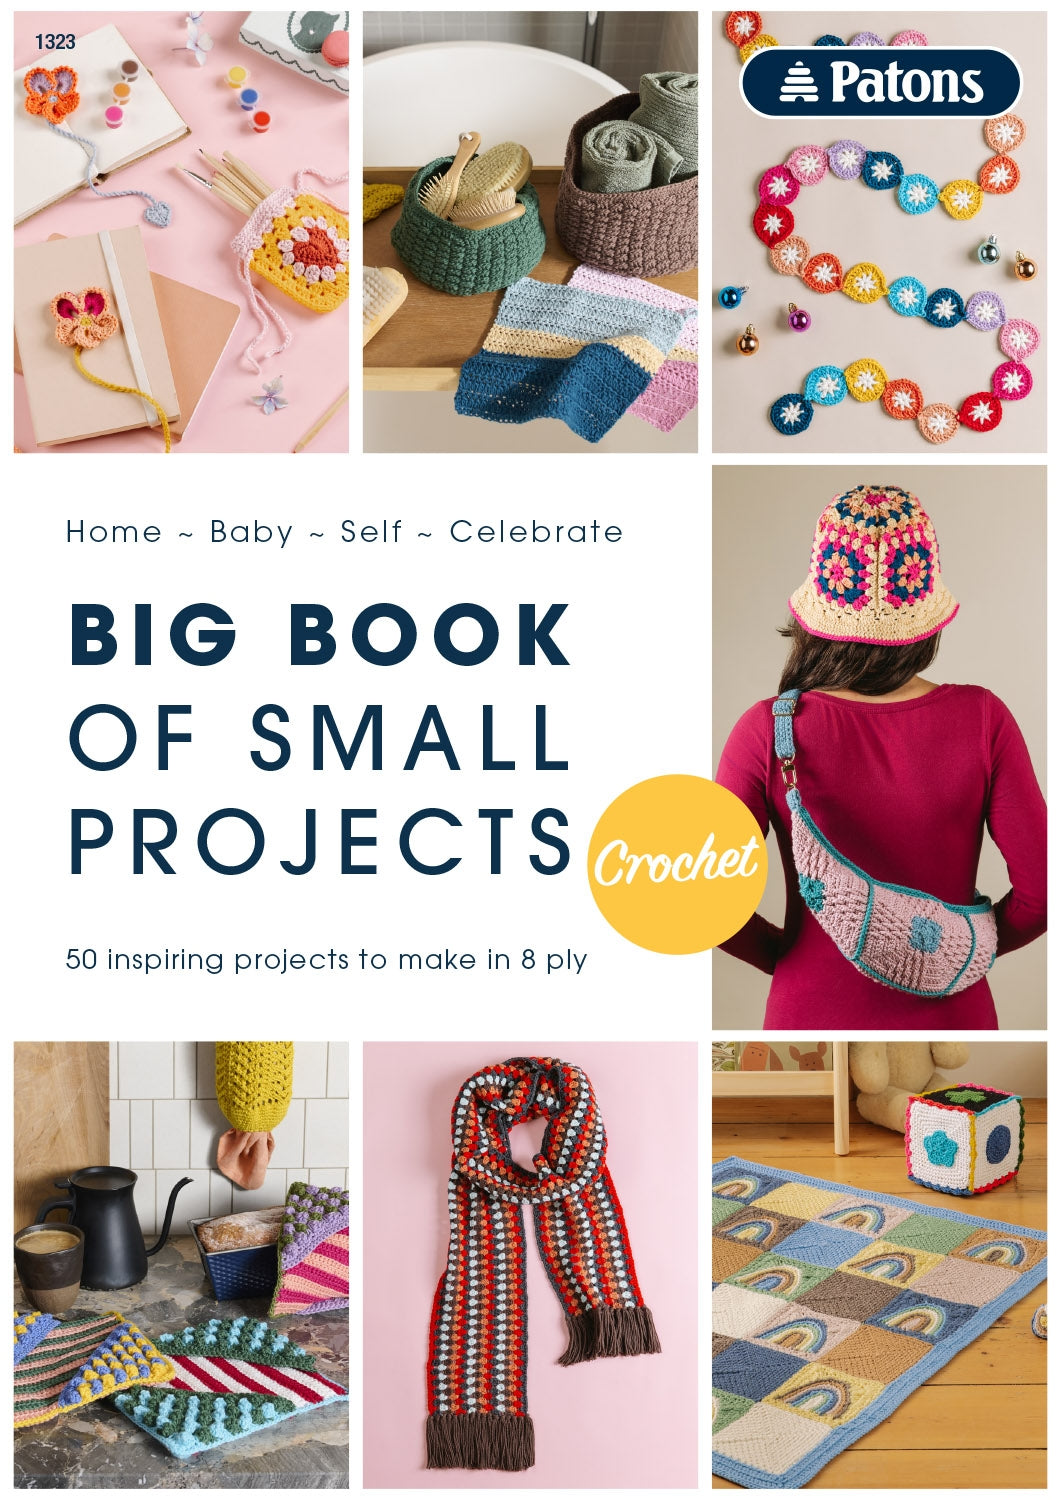 Book 1323 - Patons Big Book of Small Projects - Crochet.